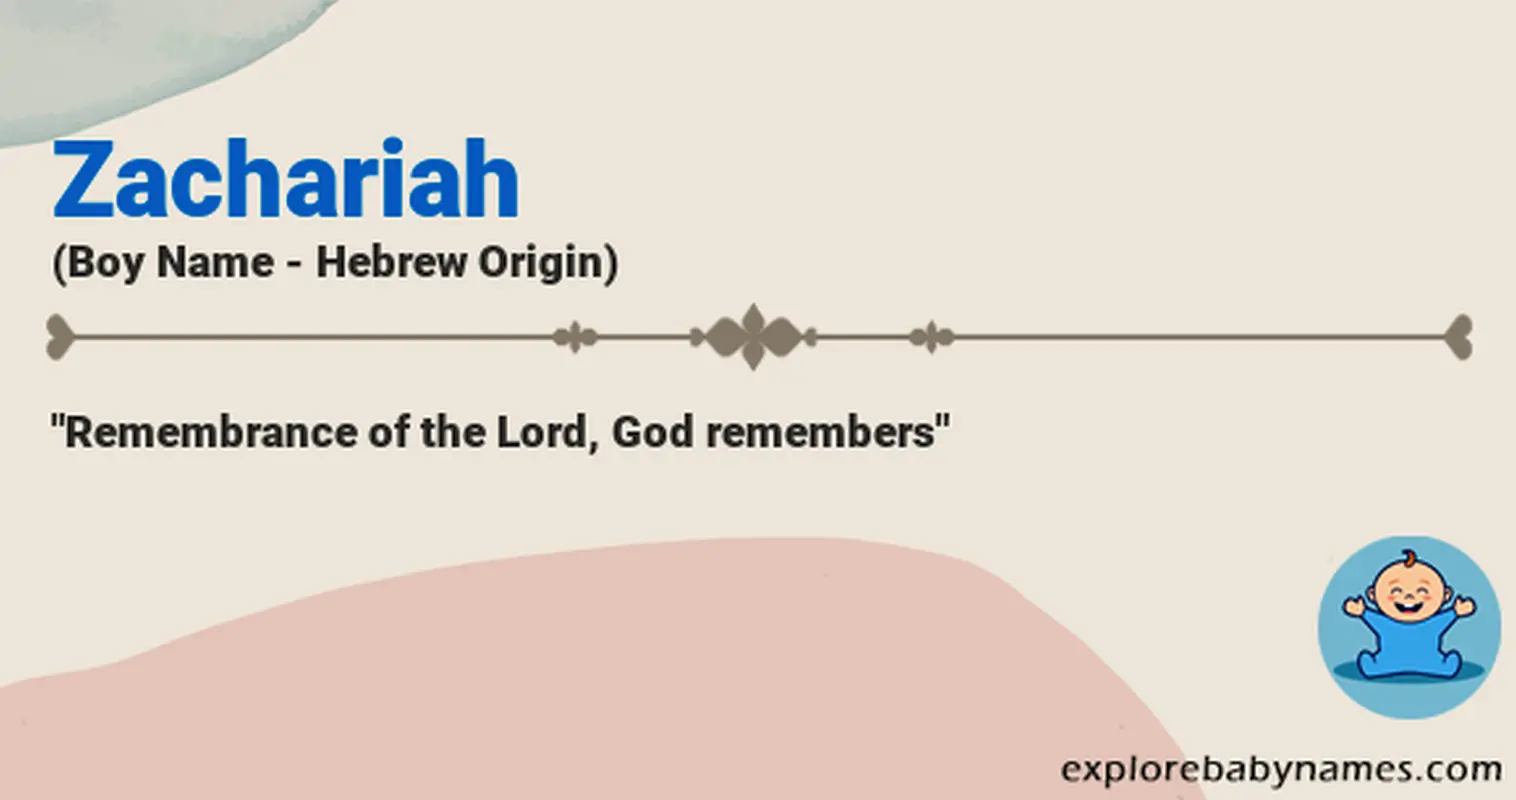 Meaning of Zachariah